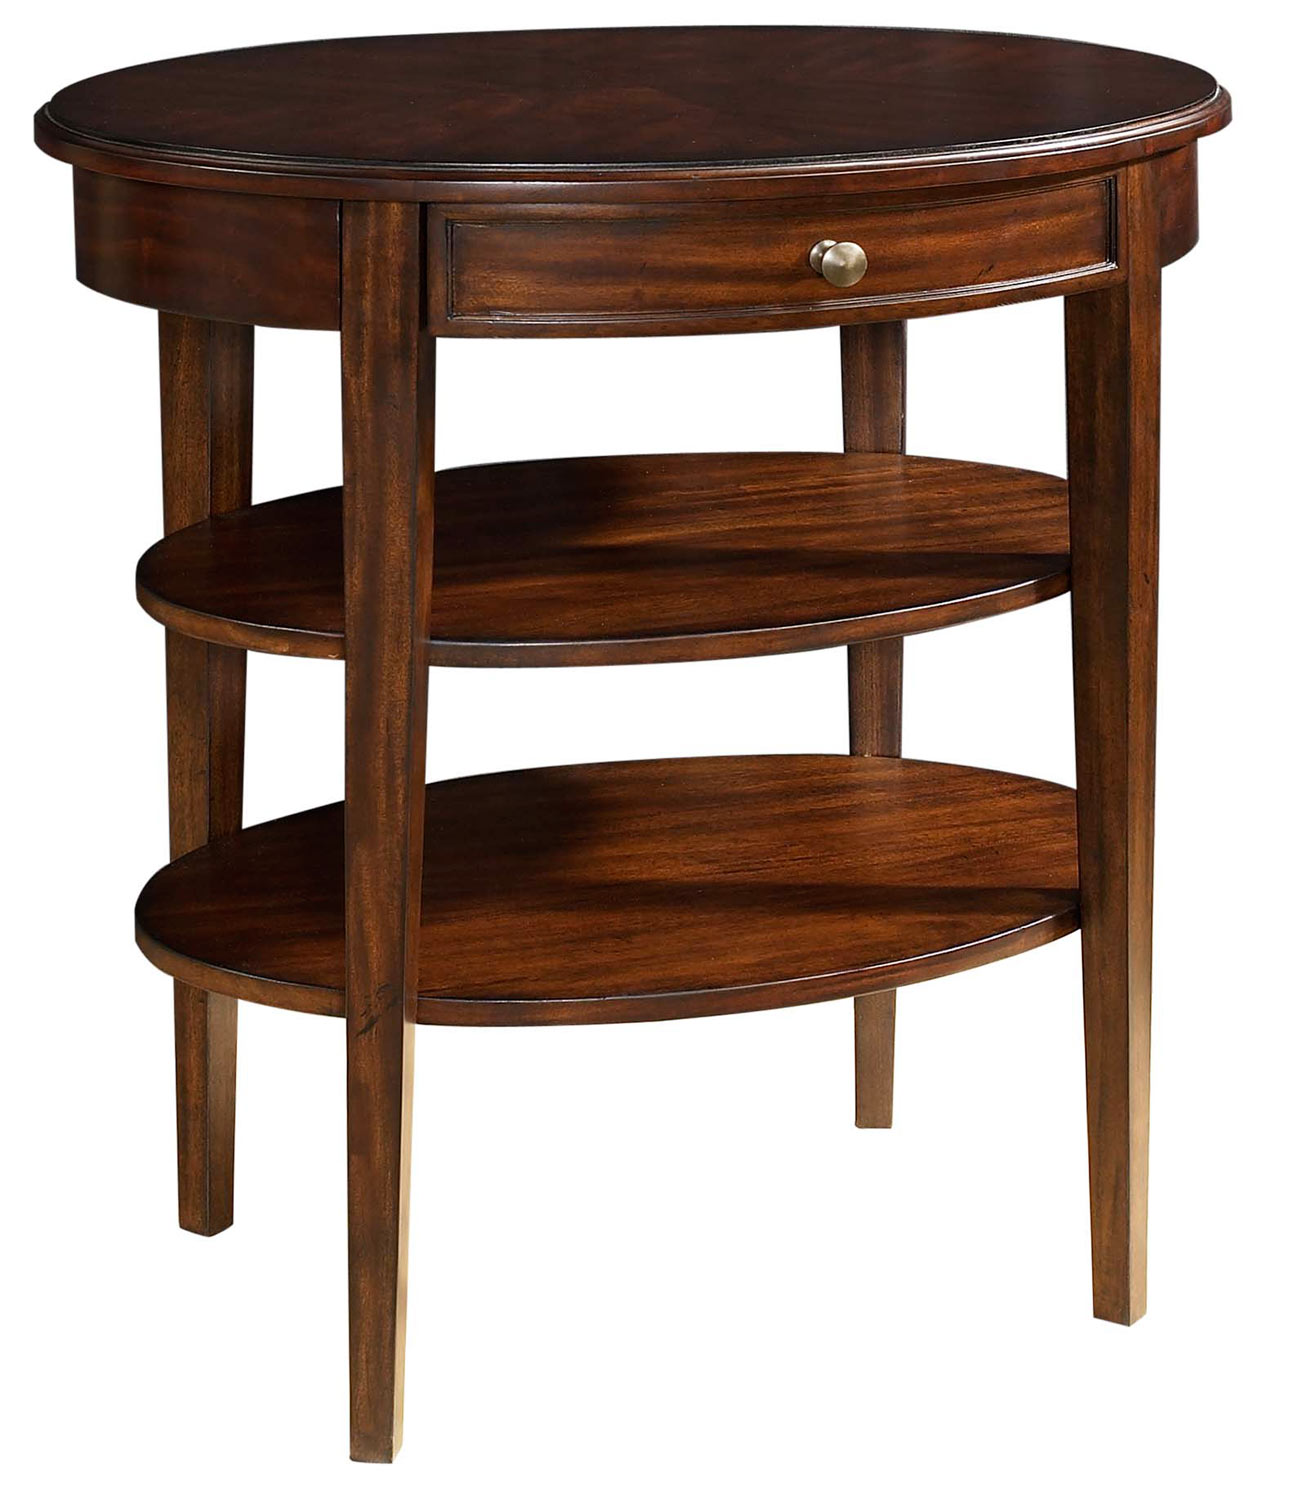 Cooper Classics Millie Side Table